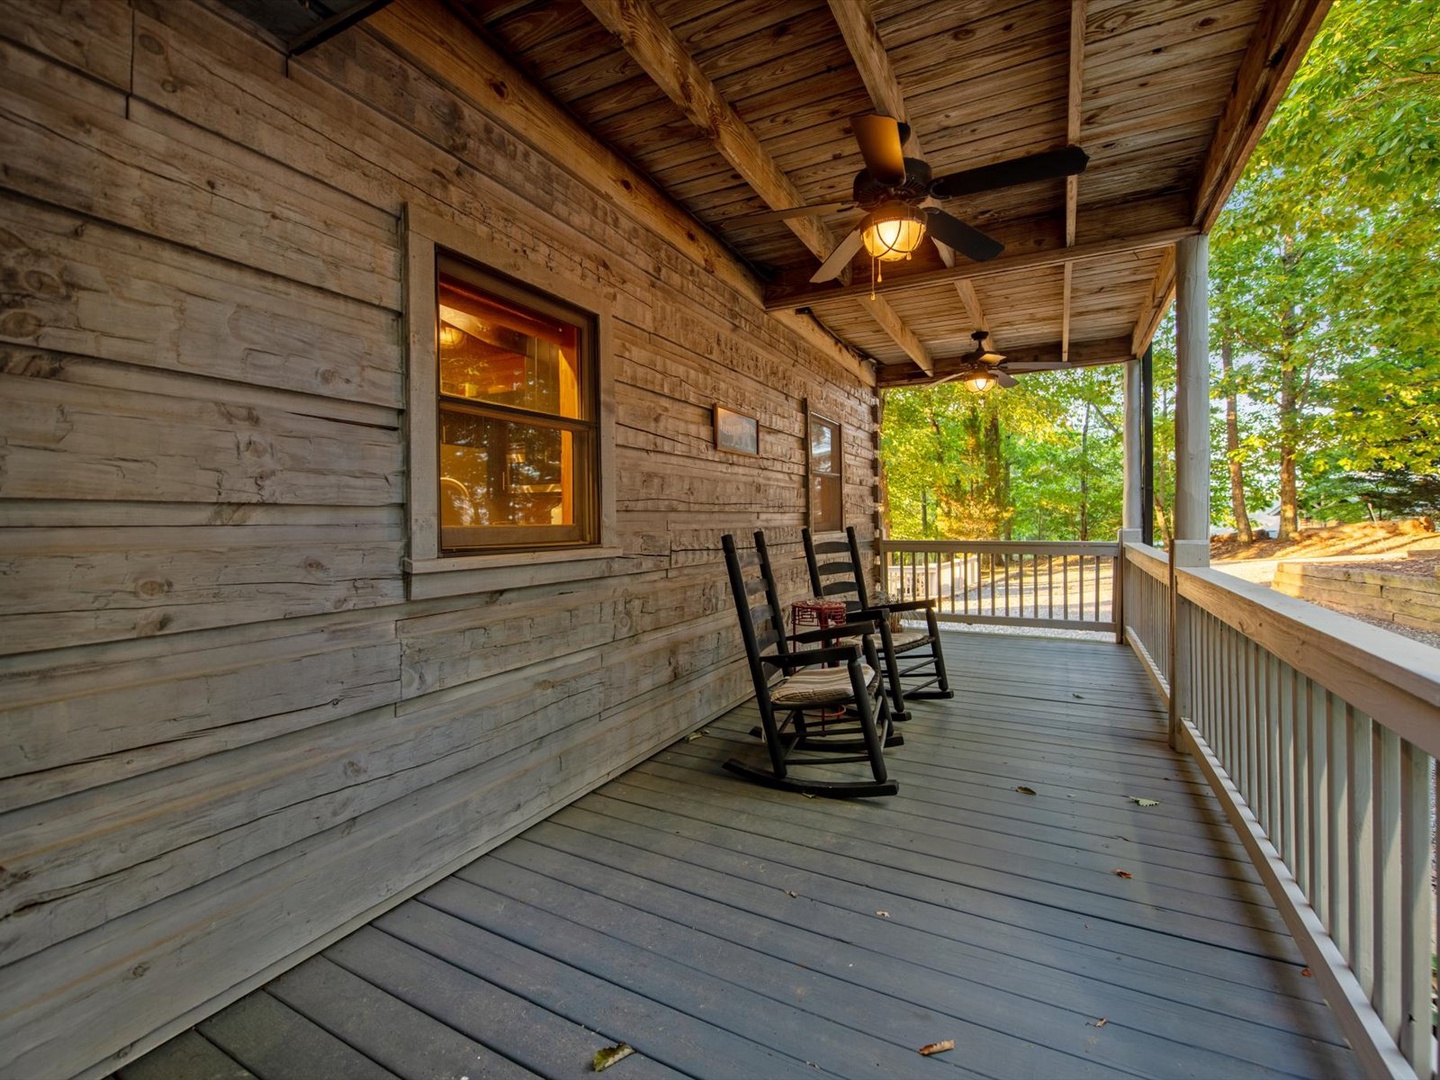 Aska Bliss- Front porch with seating and rustic cabin exterior